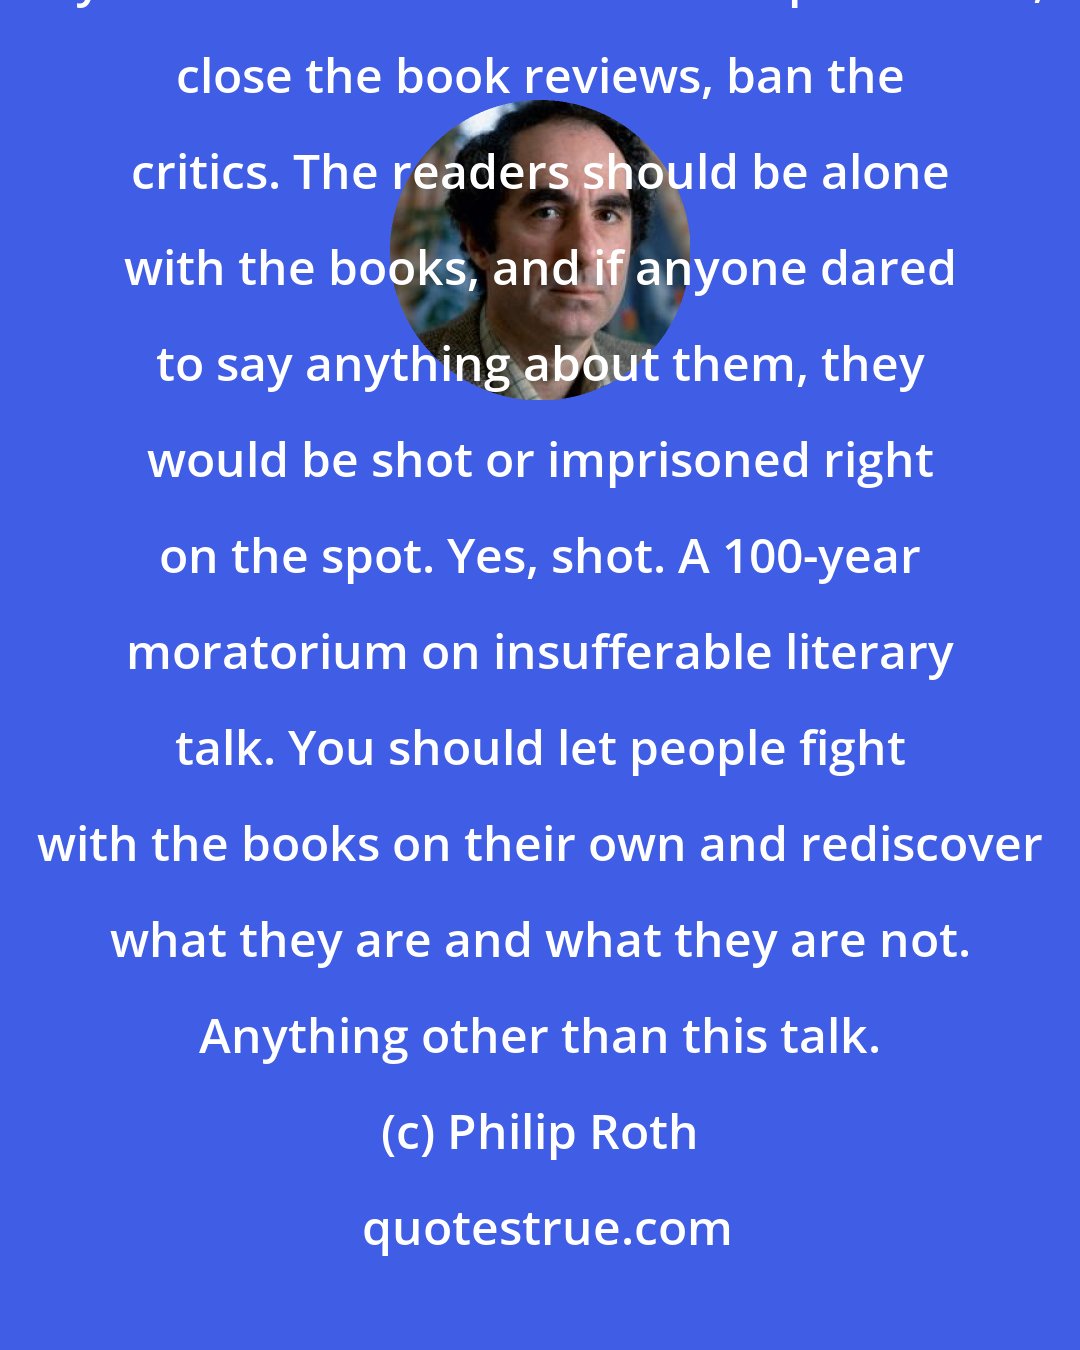 Philip Roth: I would be wonderful with a 100-year moratorium on literature talk, if you shut down all literature departments, close the book reviews, ban the critics. The readers should be alone with the books, and if anyone dared to say anything about them, they would be shot or imprisoned right on the spot. Yes, shot. A 100-year moratorium on insufferable literary talk. You should let people fight with the books on their own and rediscover what they are and what they are not. Anything other than this talk.